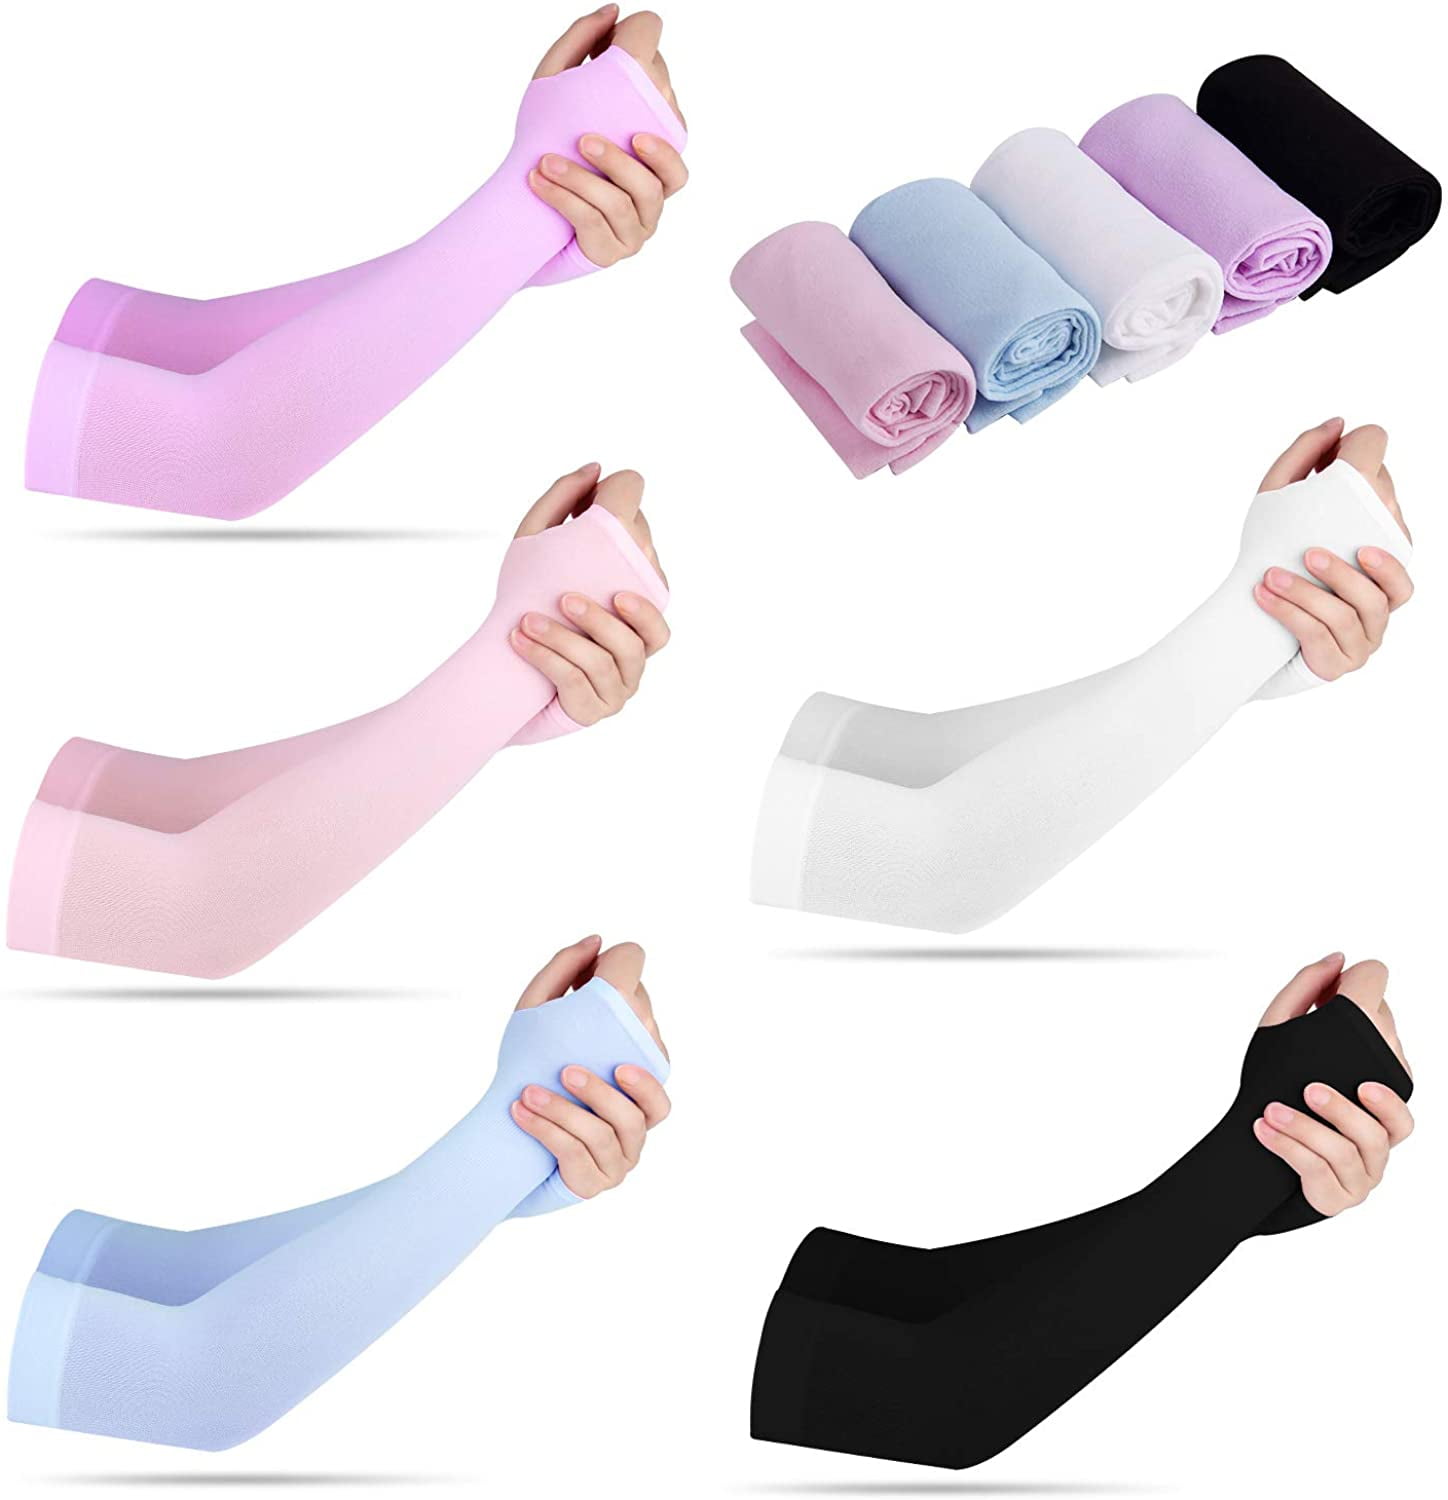 10Pairs Black White Cooling Arm Sleeves Cover UV Sun Protection Basketball Sport 